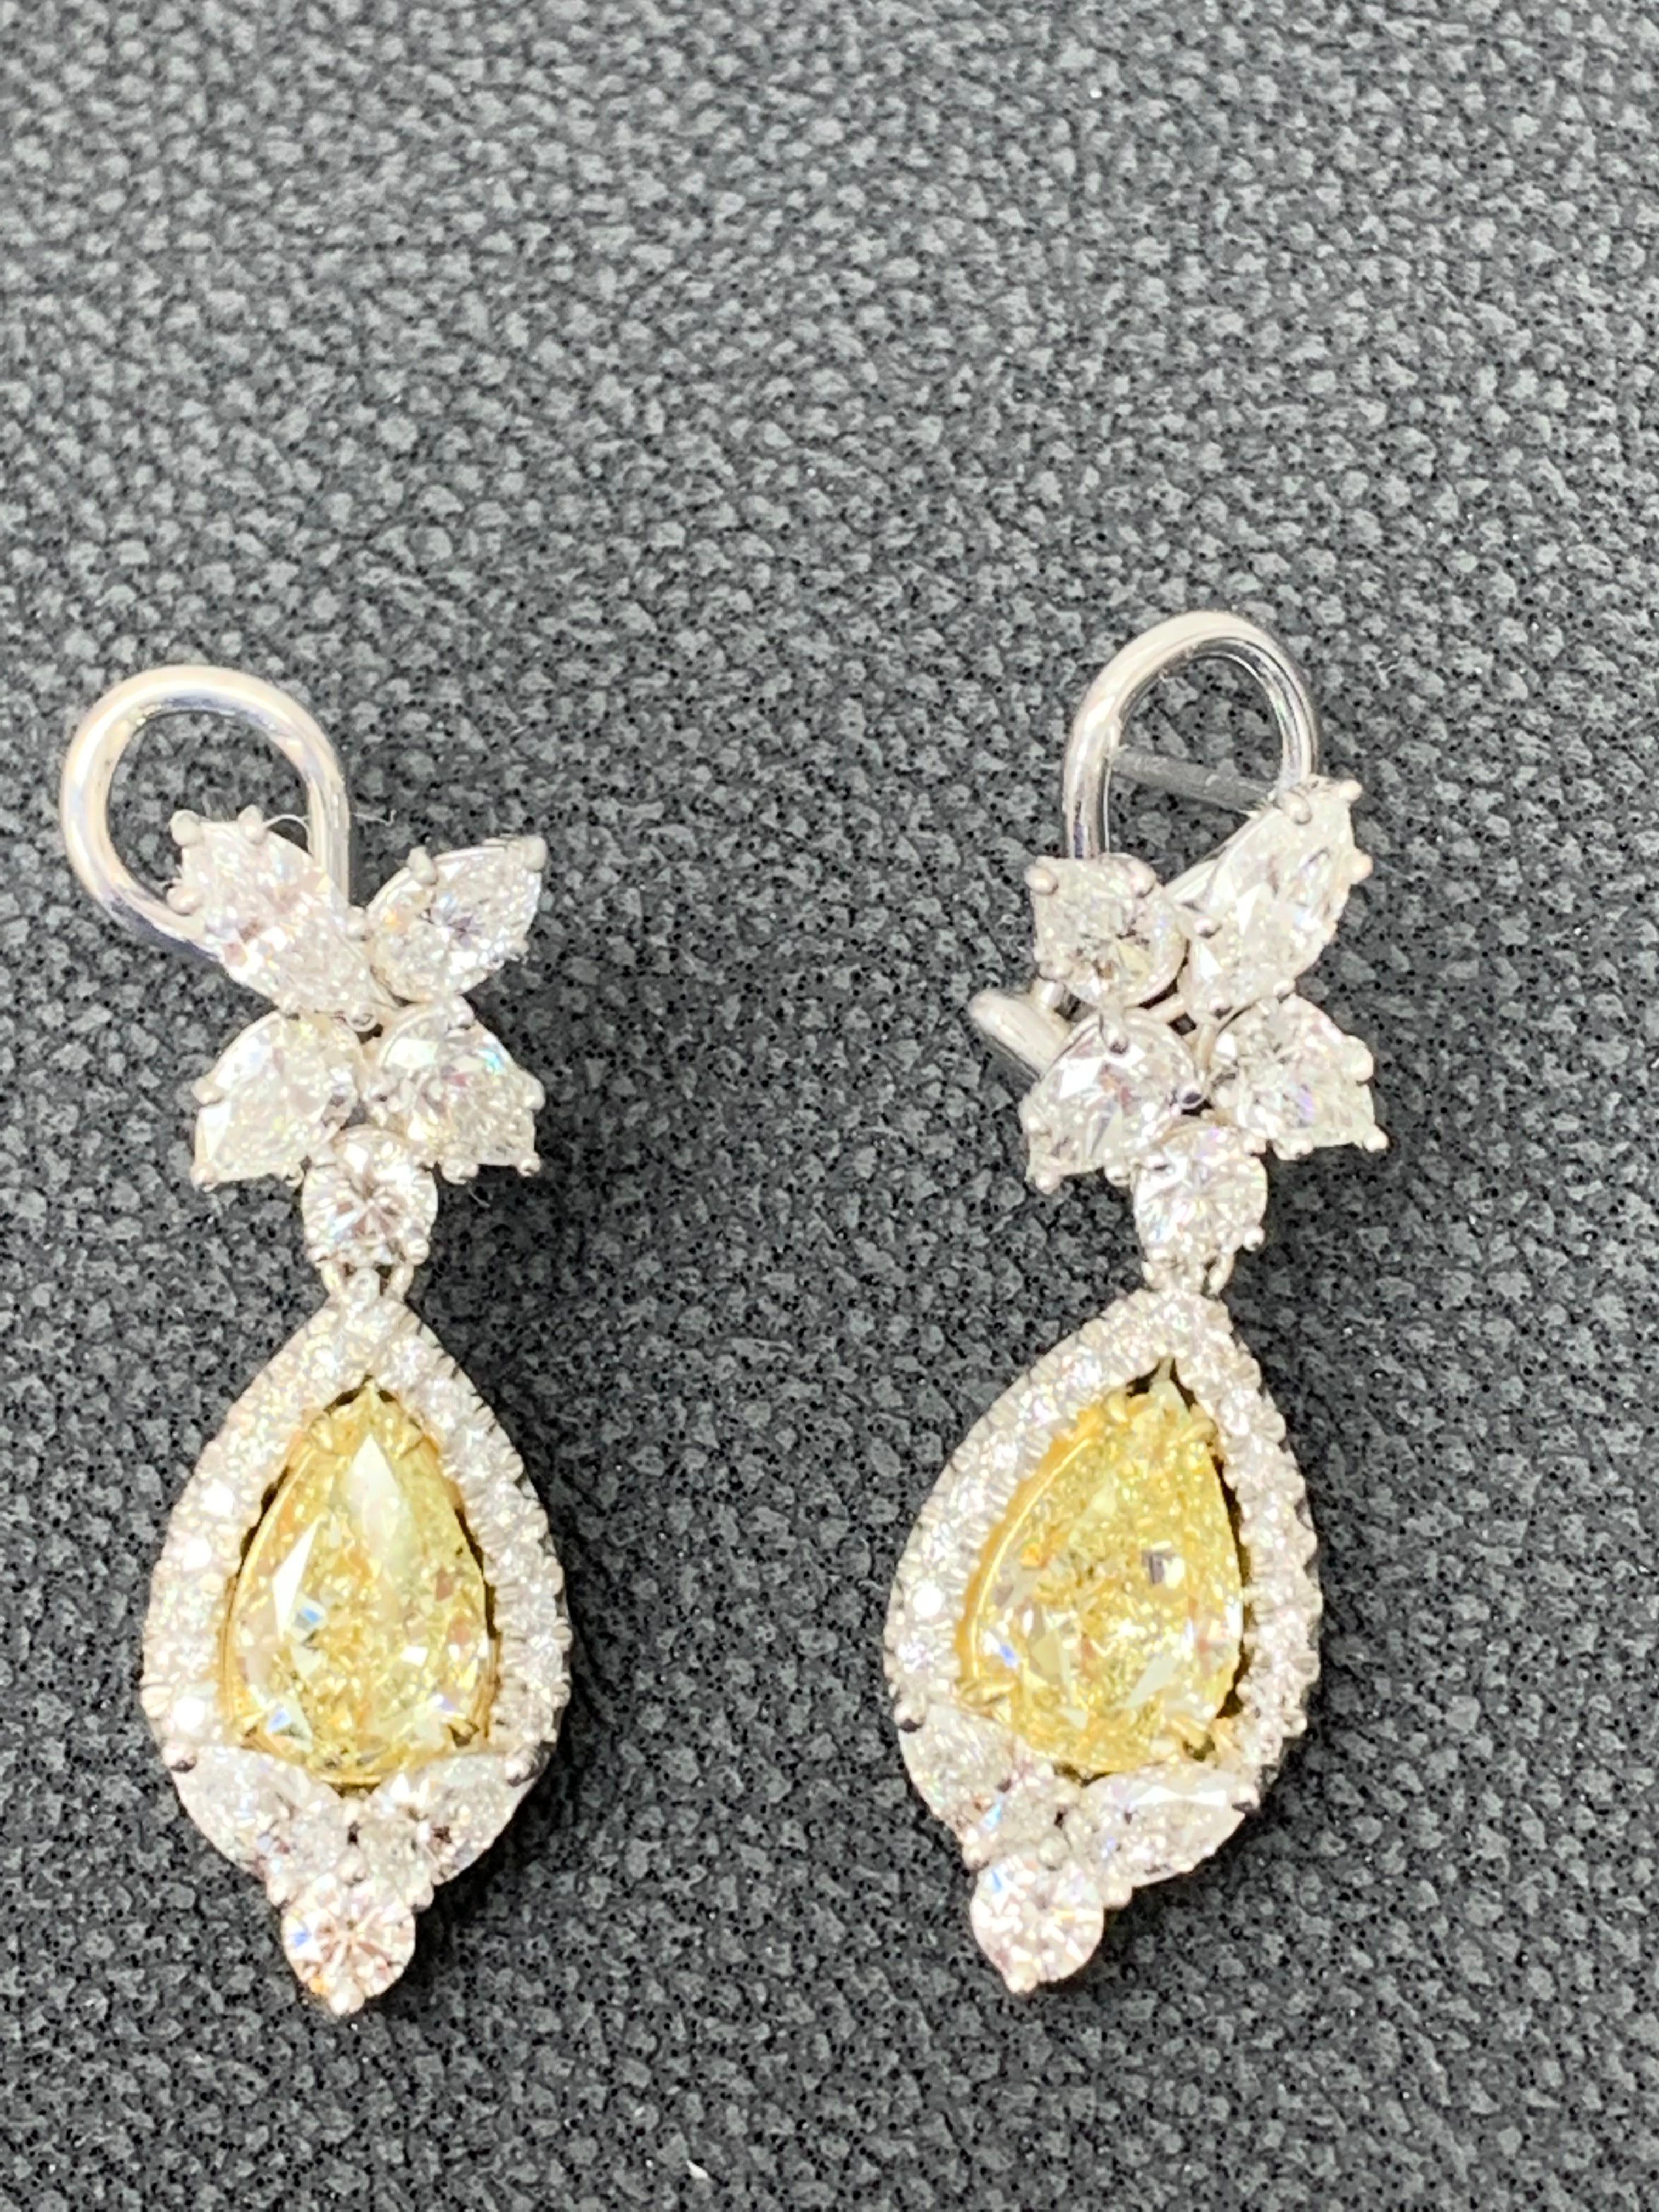 A beautiful and chic pair of drop earrings showcasing a cluster of brilliant mixed-cut diamonds, and pear-shaped brilliant yellow diamonds set in an intricate and stylish design.  10 Mixed cut Diamonds weigh 1.91 carats in total. 2 yellow diamonds